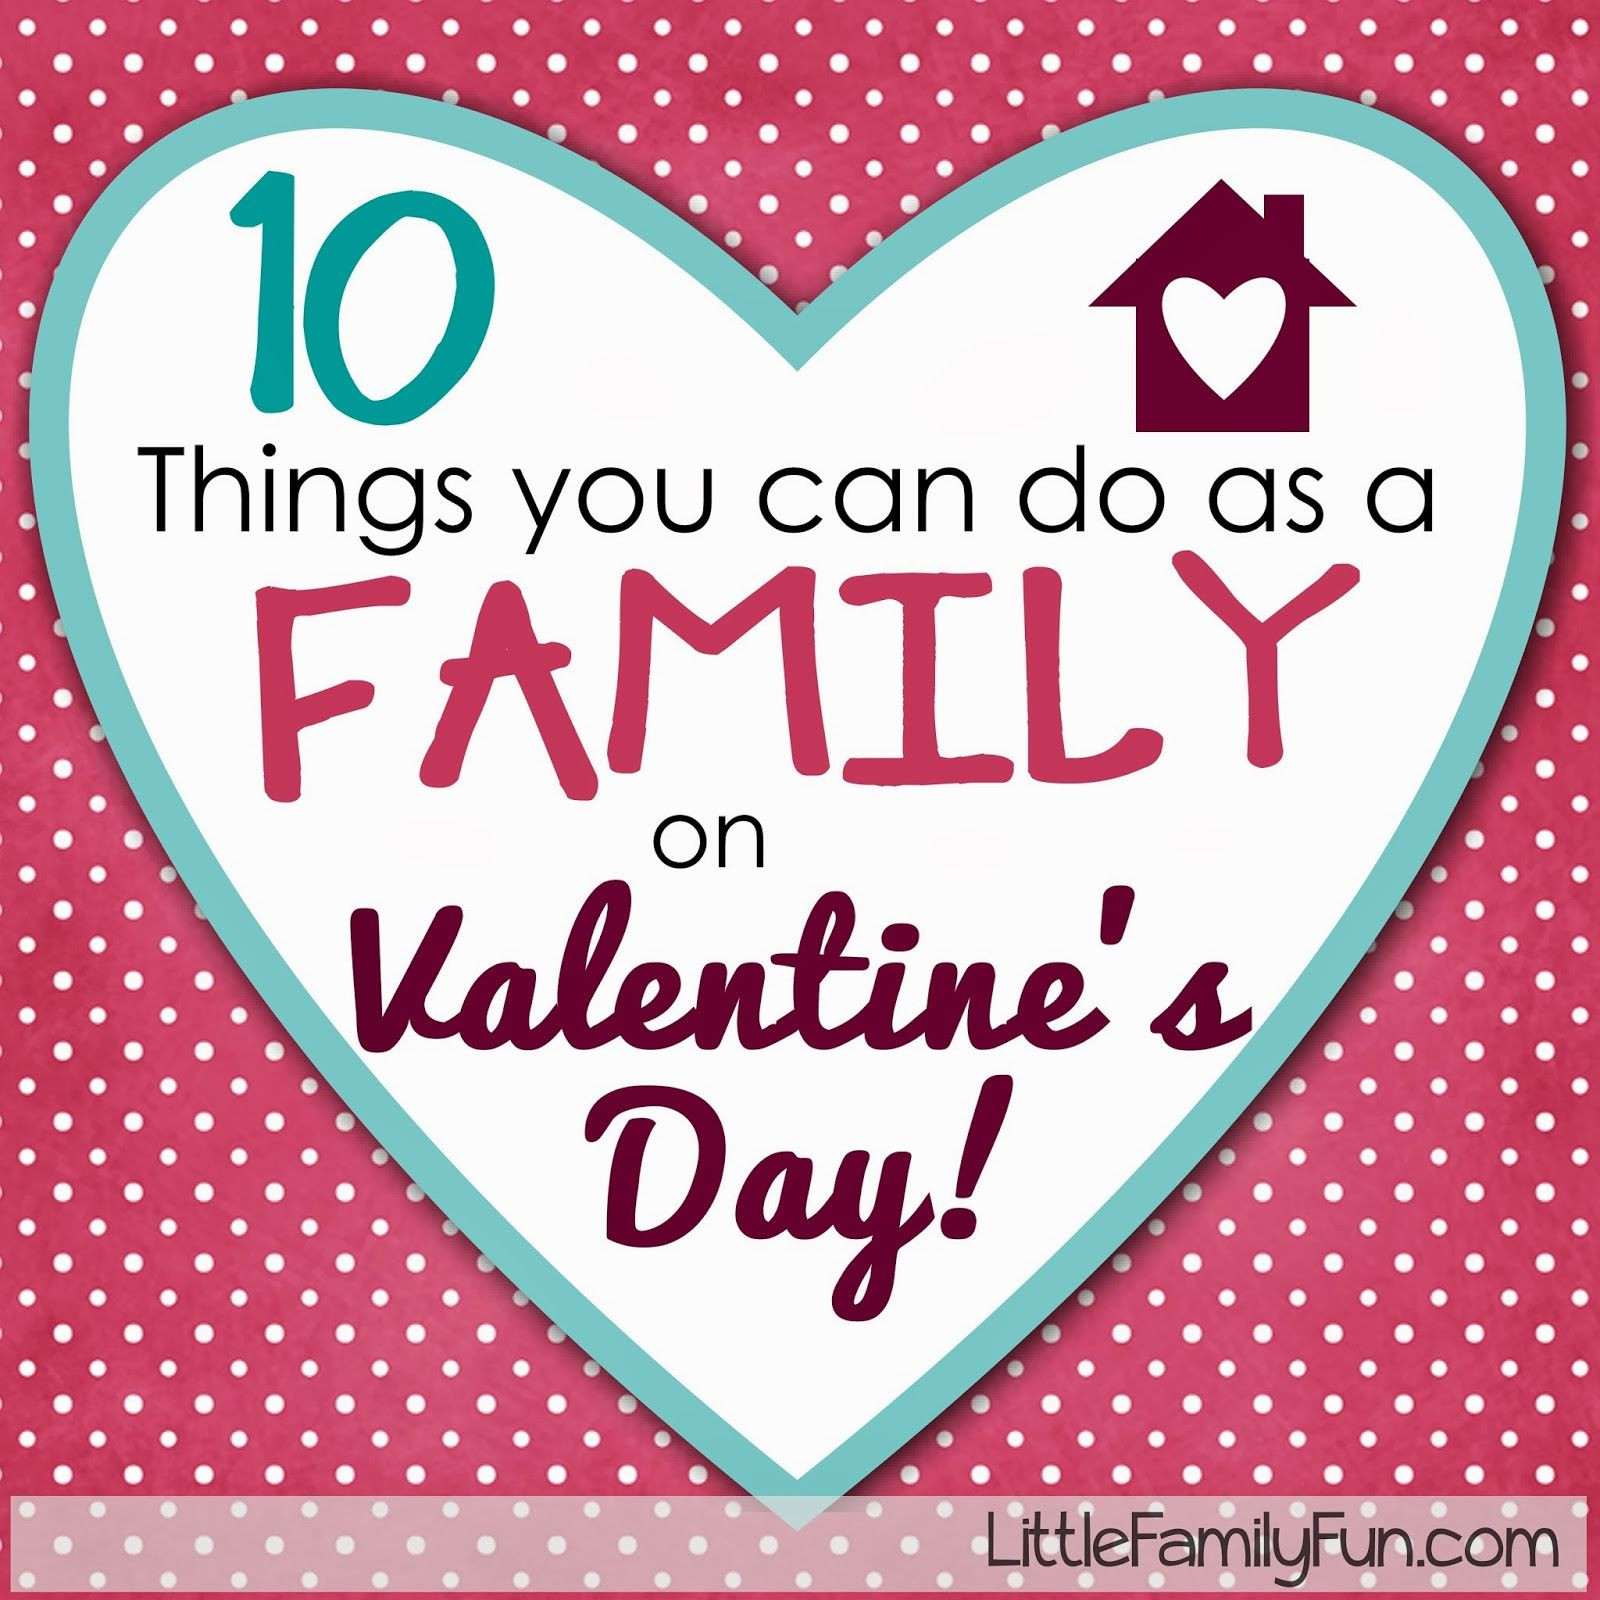 Valentines Day Ideas For Families
 10 fun & easy Family Activities for Valentines Day Check